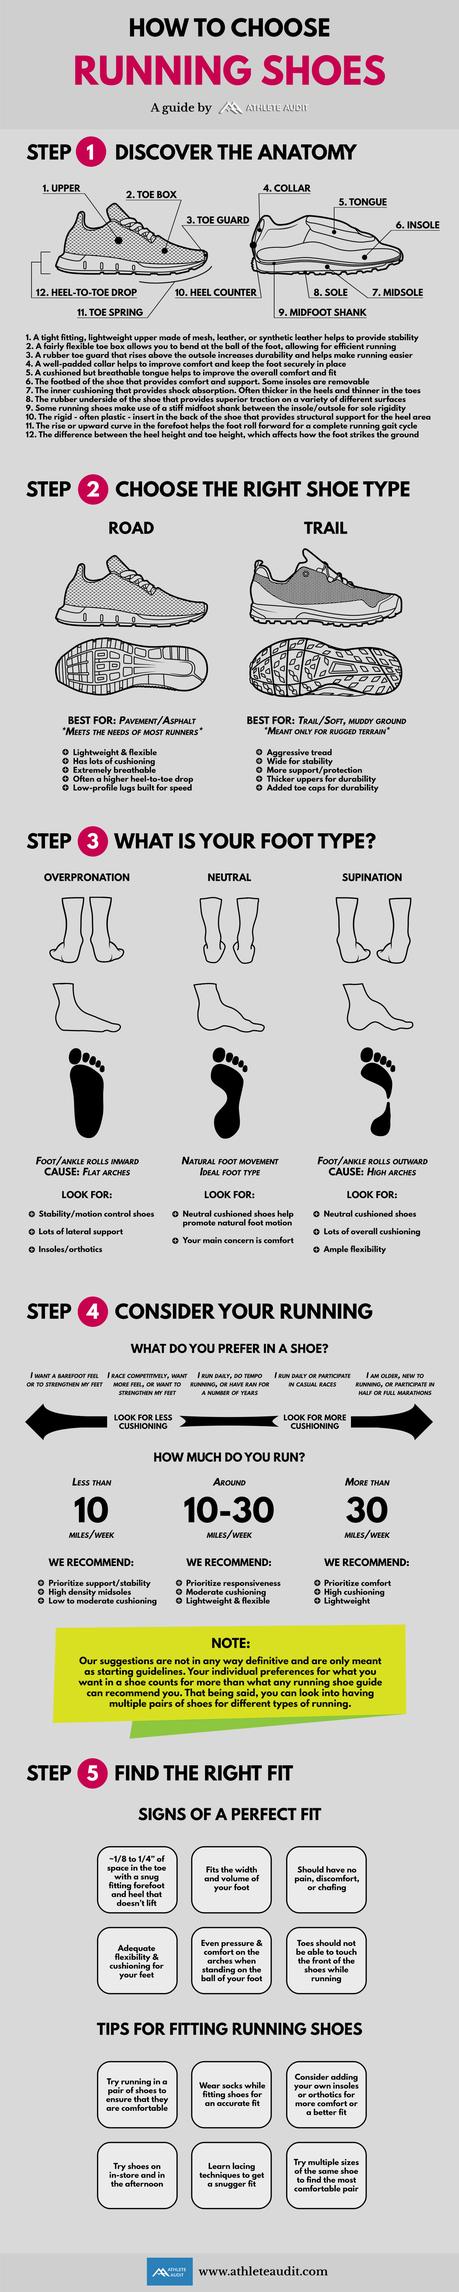 How to Choose Running Shoes - Infographic - Athlete Audit